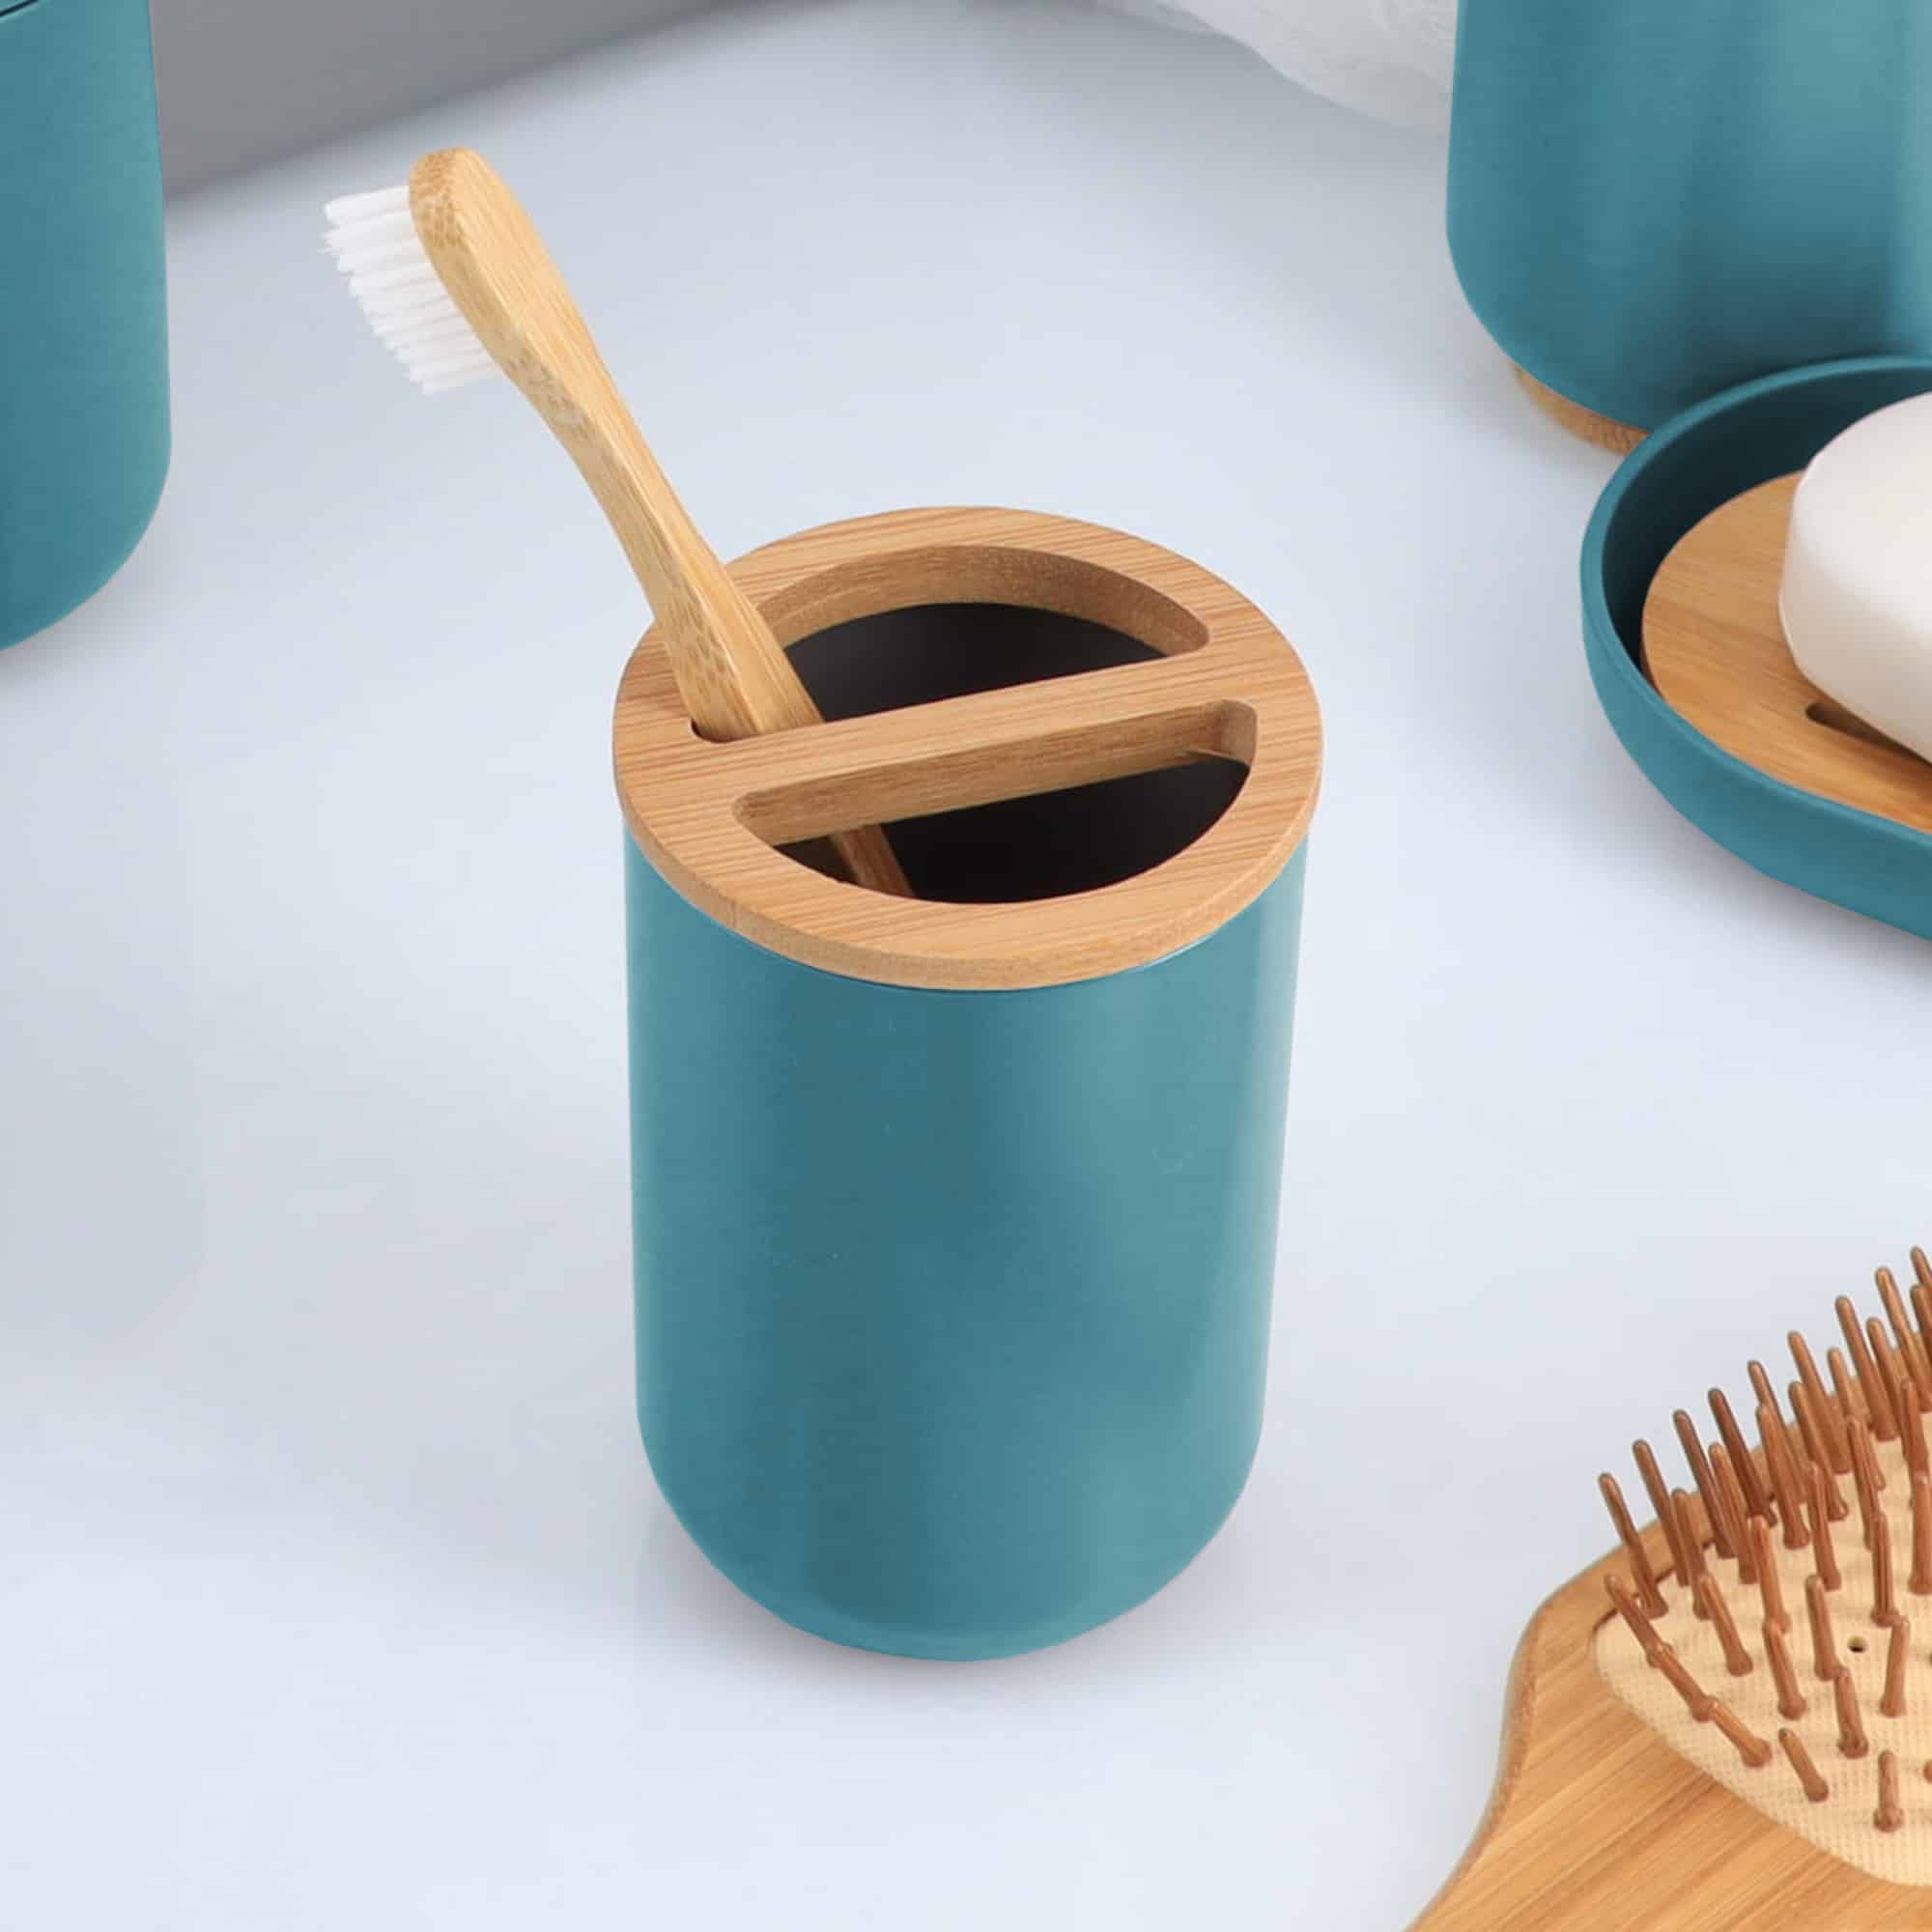 minimalistic toothbrush and toothpaste holder for modern bathroom countertop